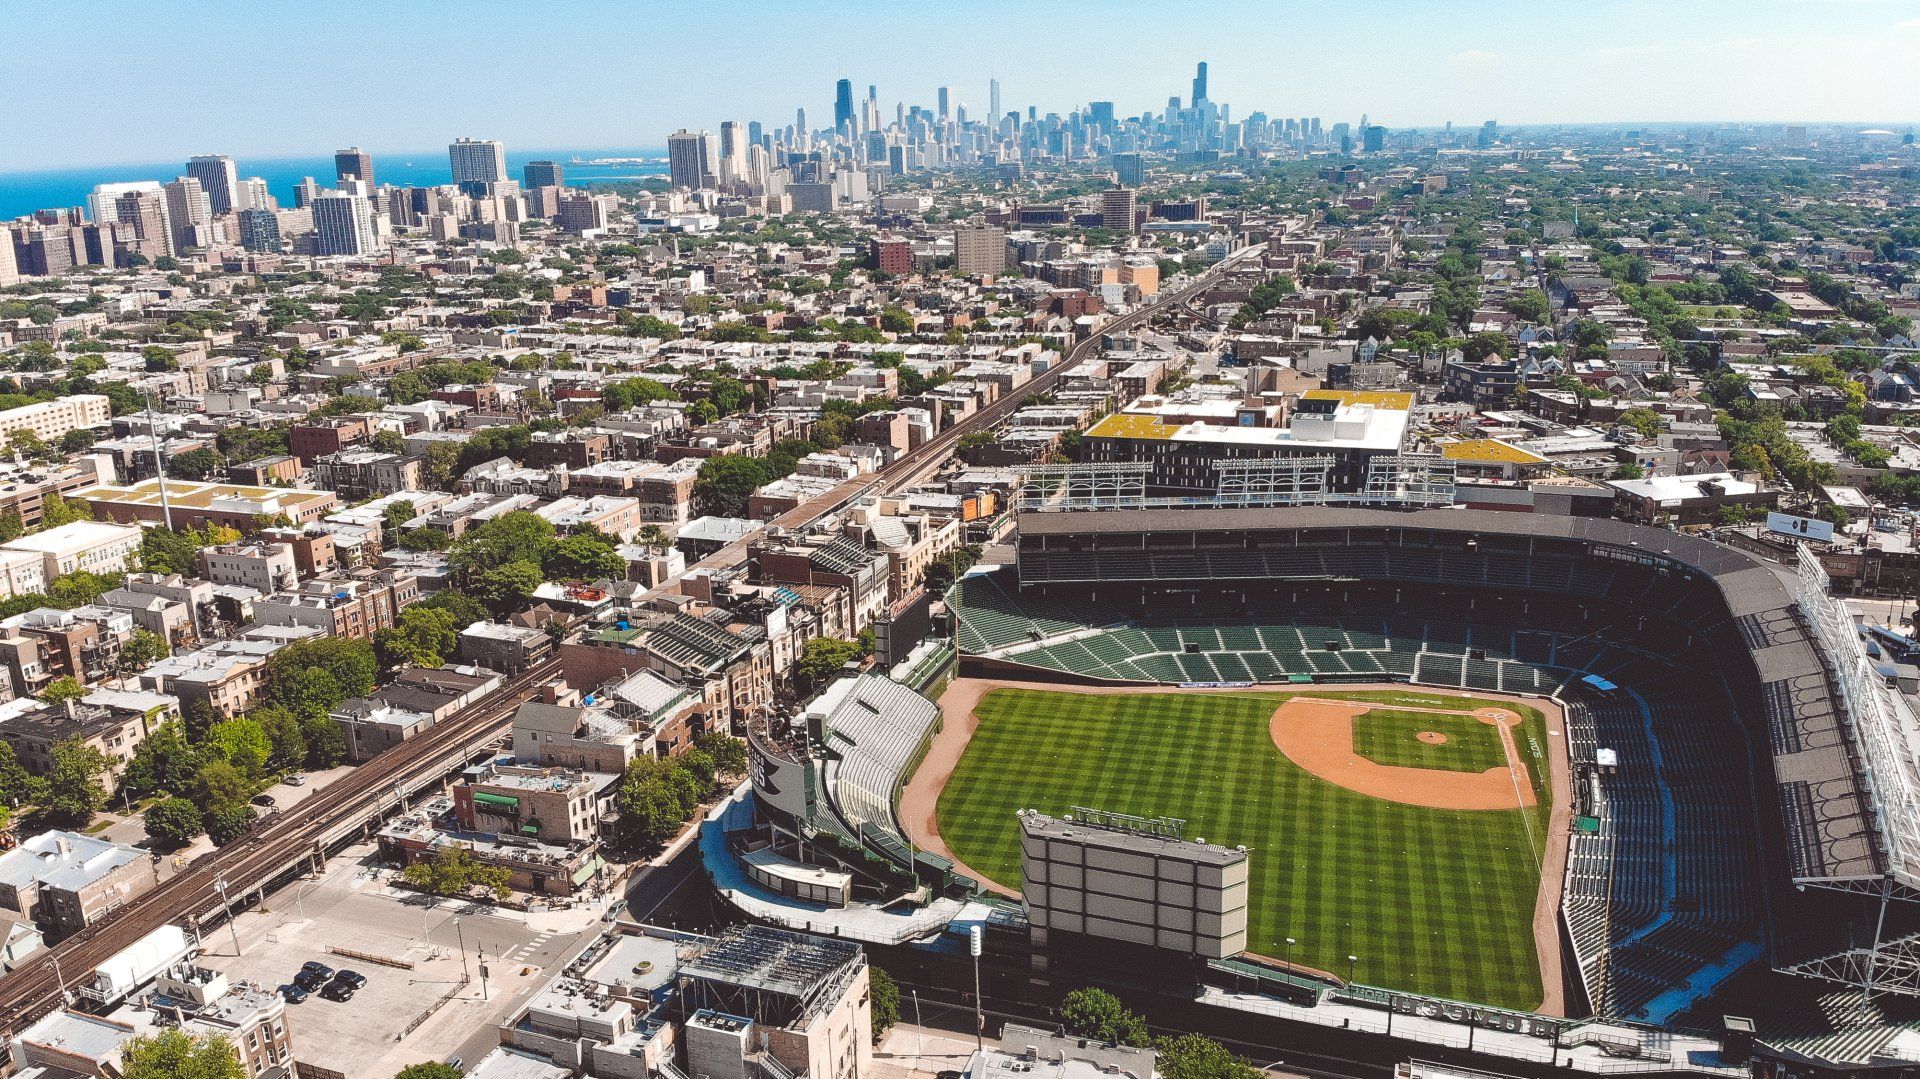 An aerial view of a baseball stadium with a city in the background around Lakeview.